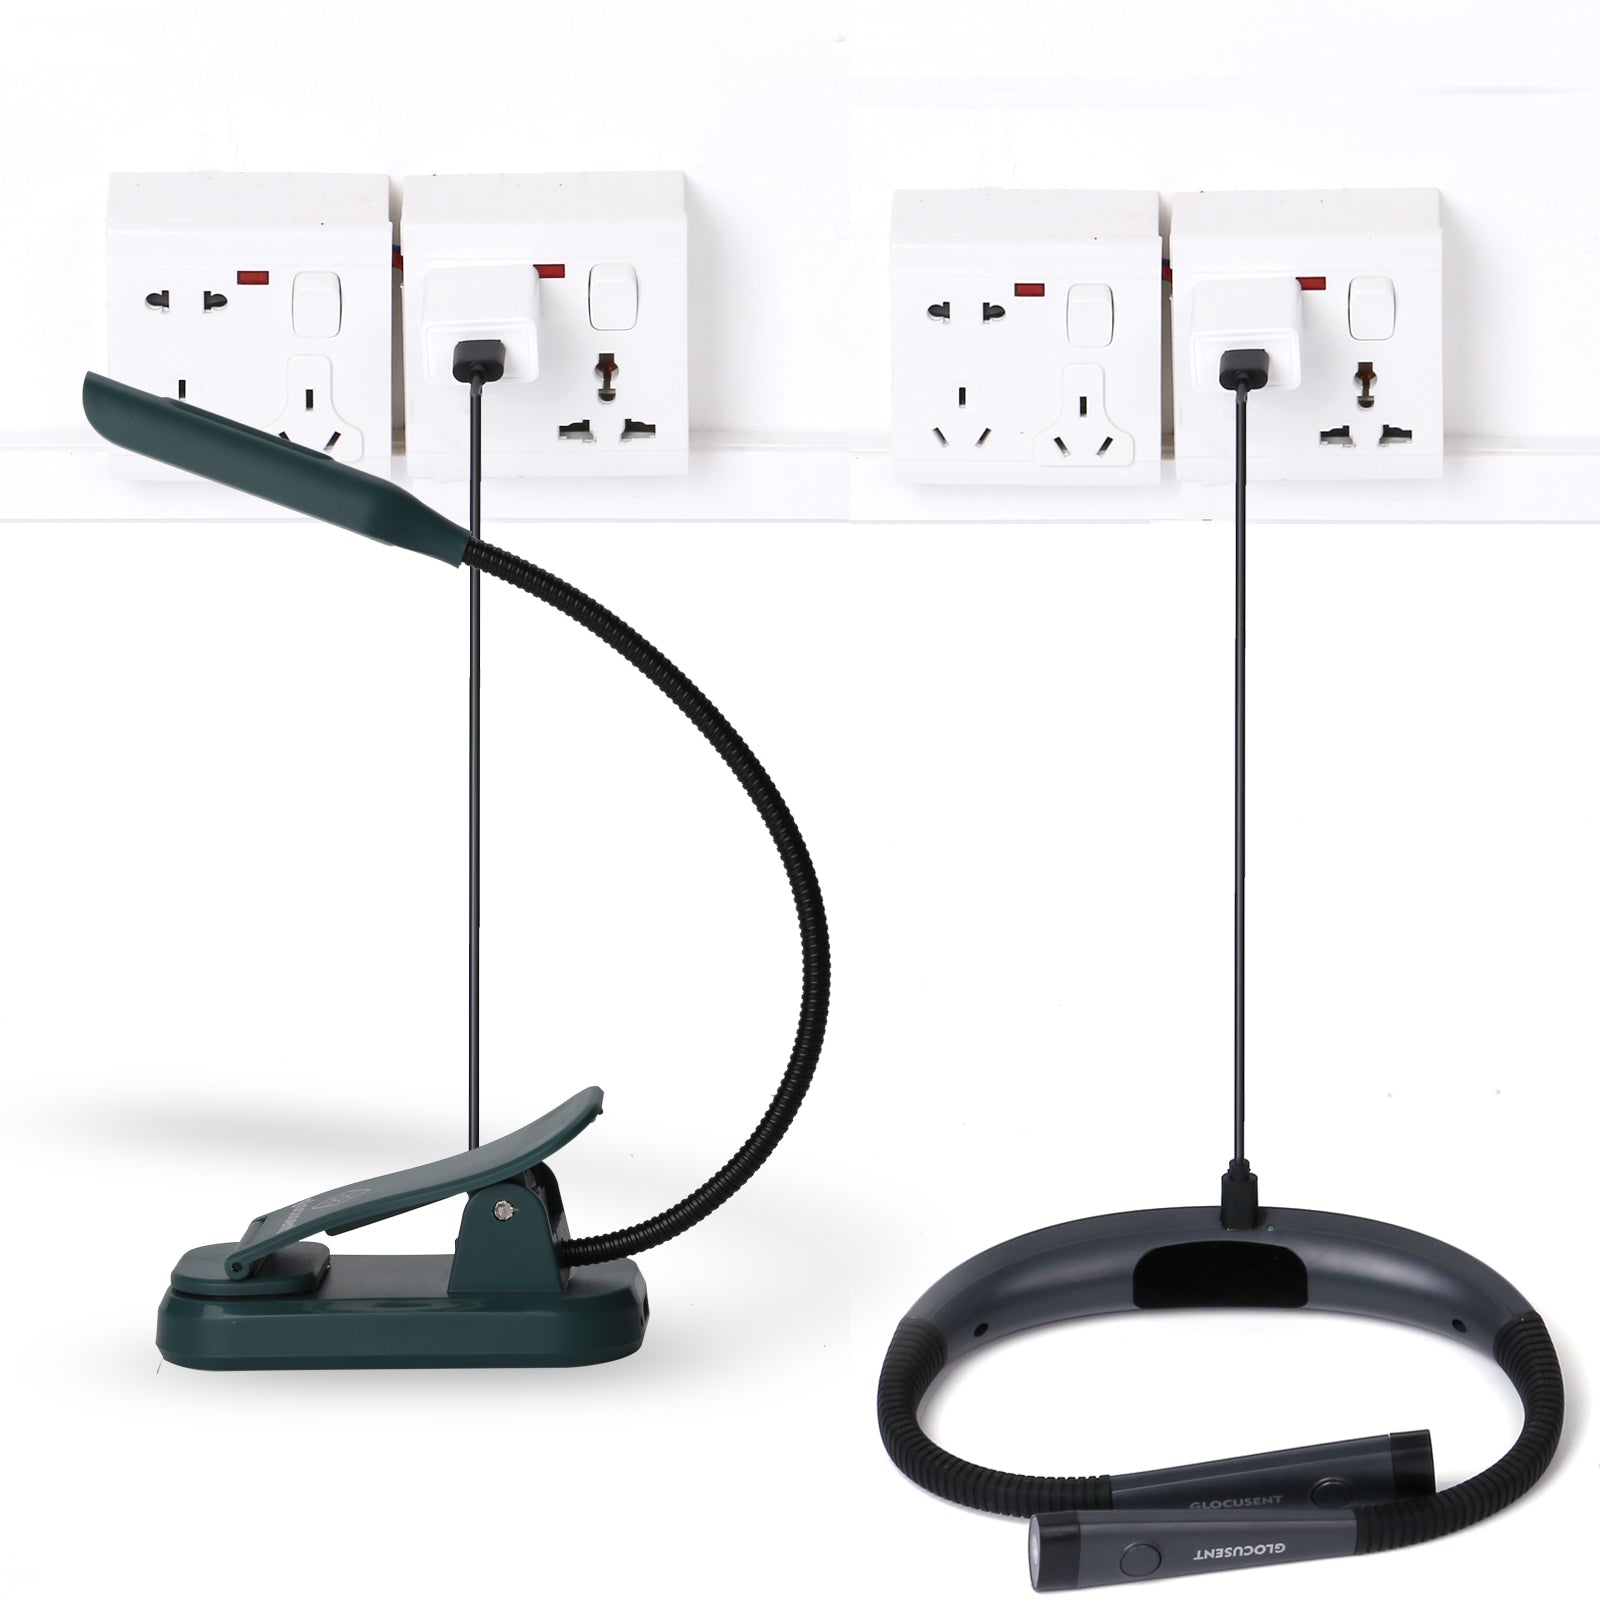 Glocusent Type-C Charging Cord for LED Rechargeable Lights Products | Can be used with wall plug